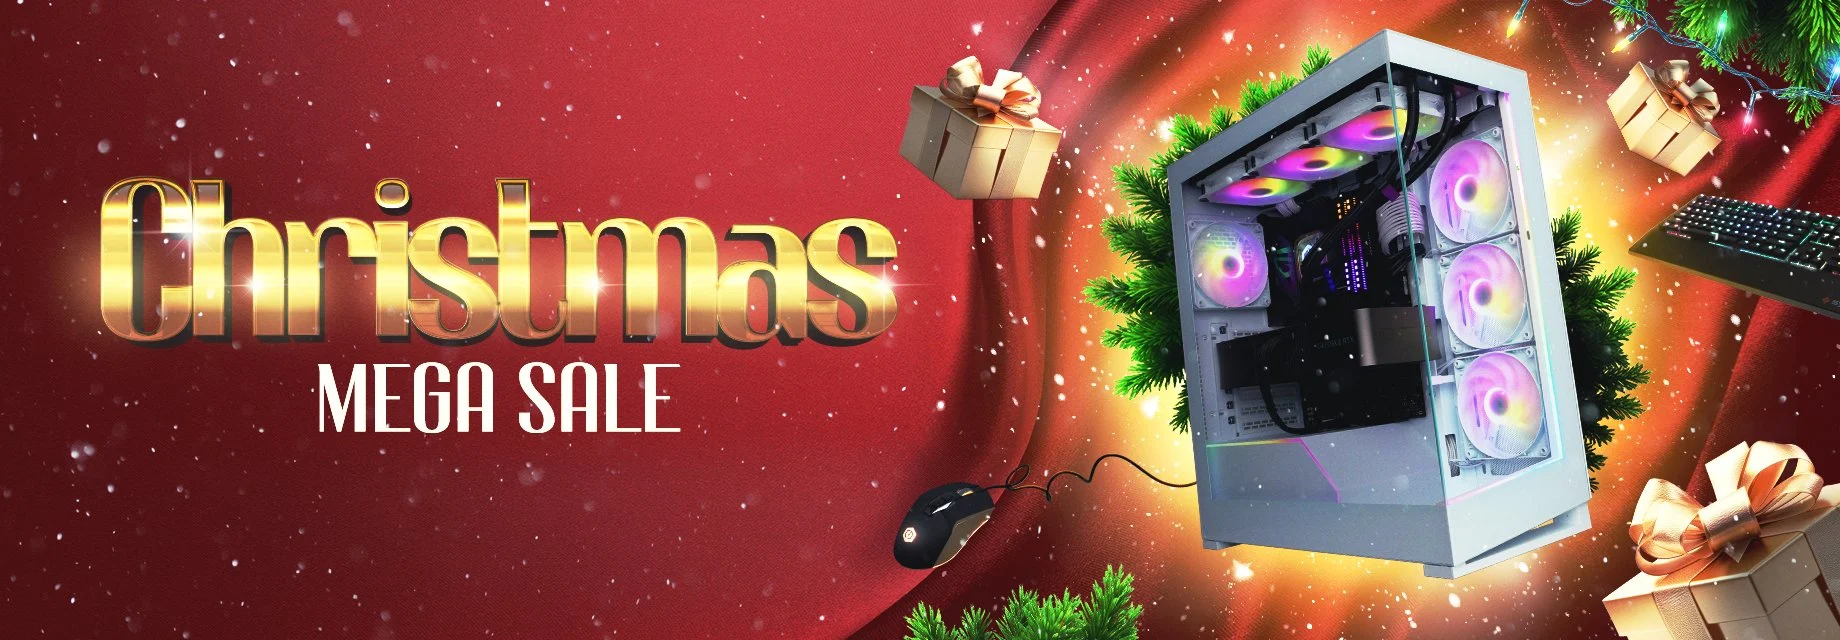 Christmas Sale : Gaming PC Deals for Festive Gamers